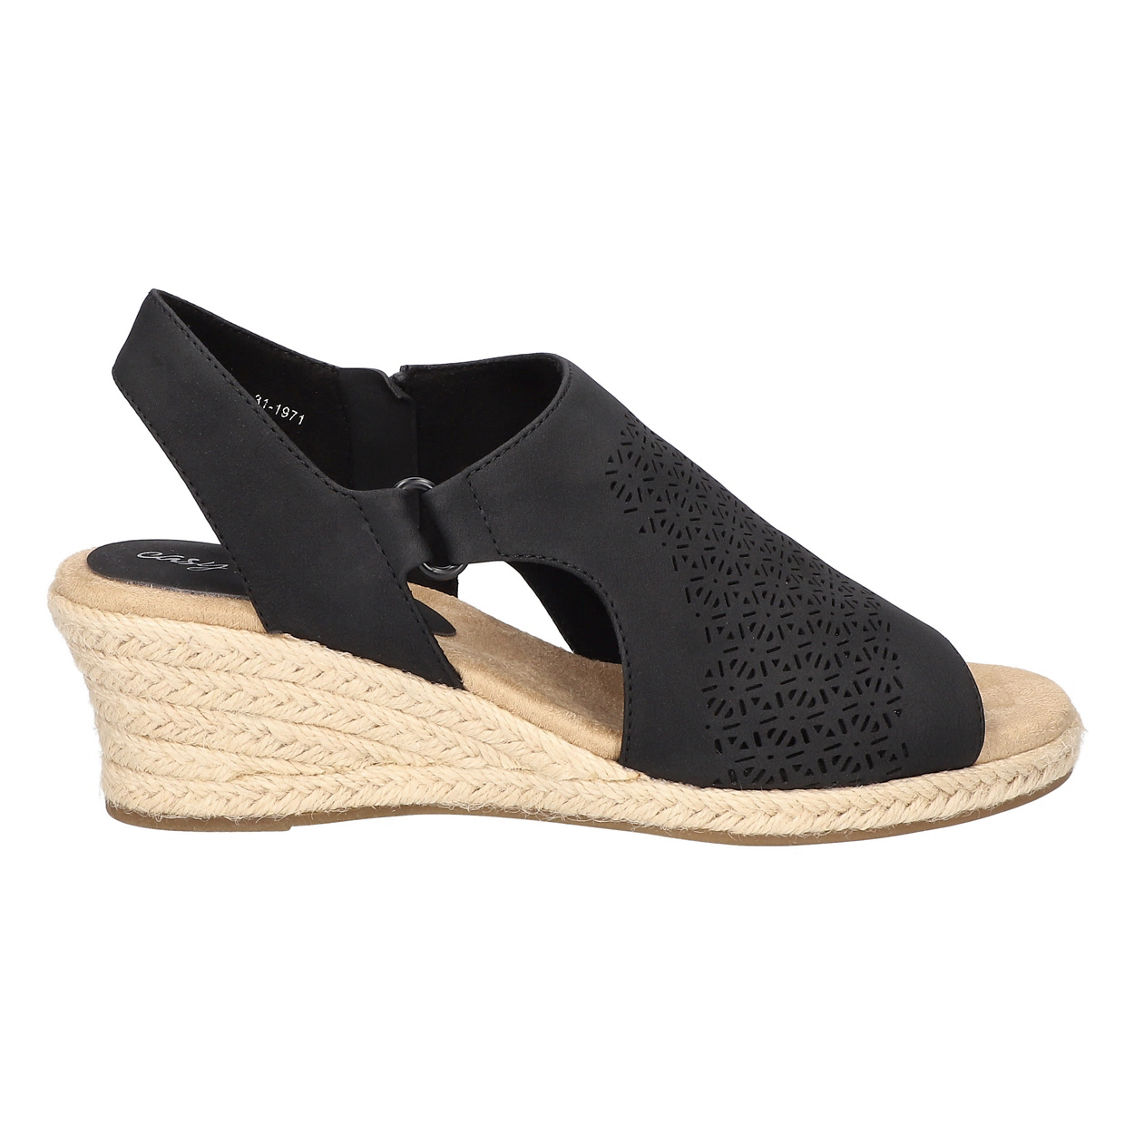 Serena by Easy Street Espadrille Wedge Sandals - Image 3 of 5